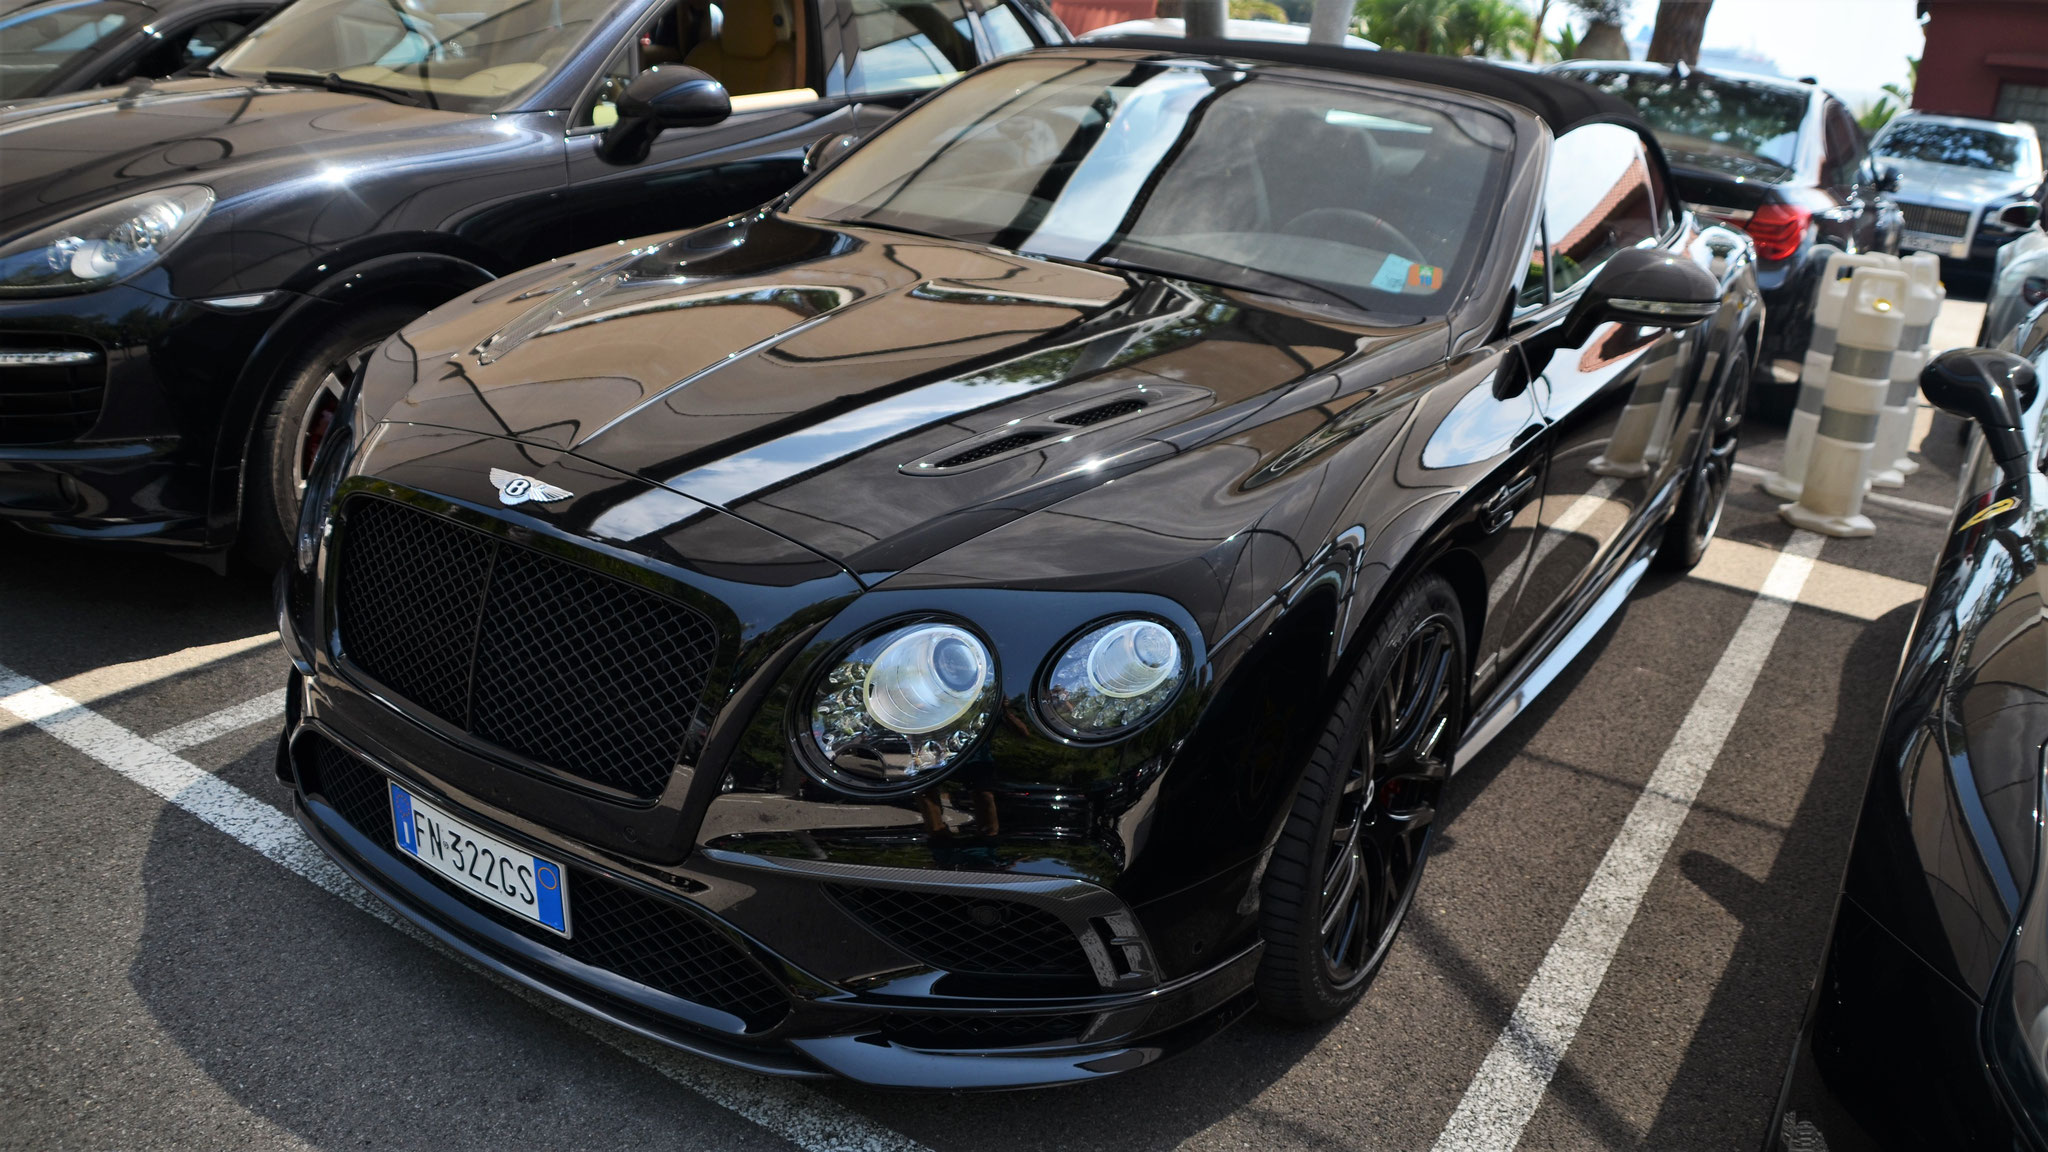 Bentley Continental GTC Supersports - FN-322-GS (ITA)